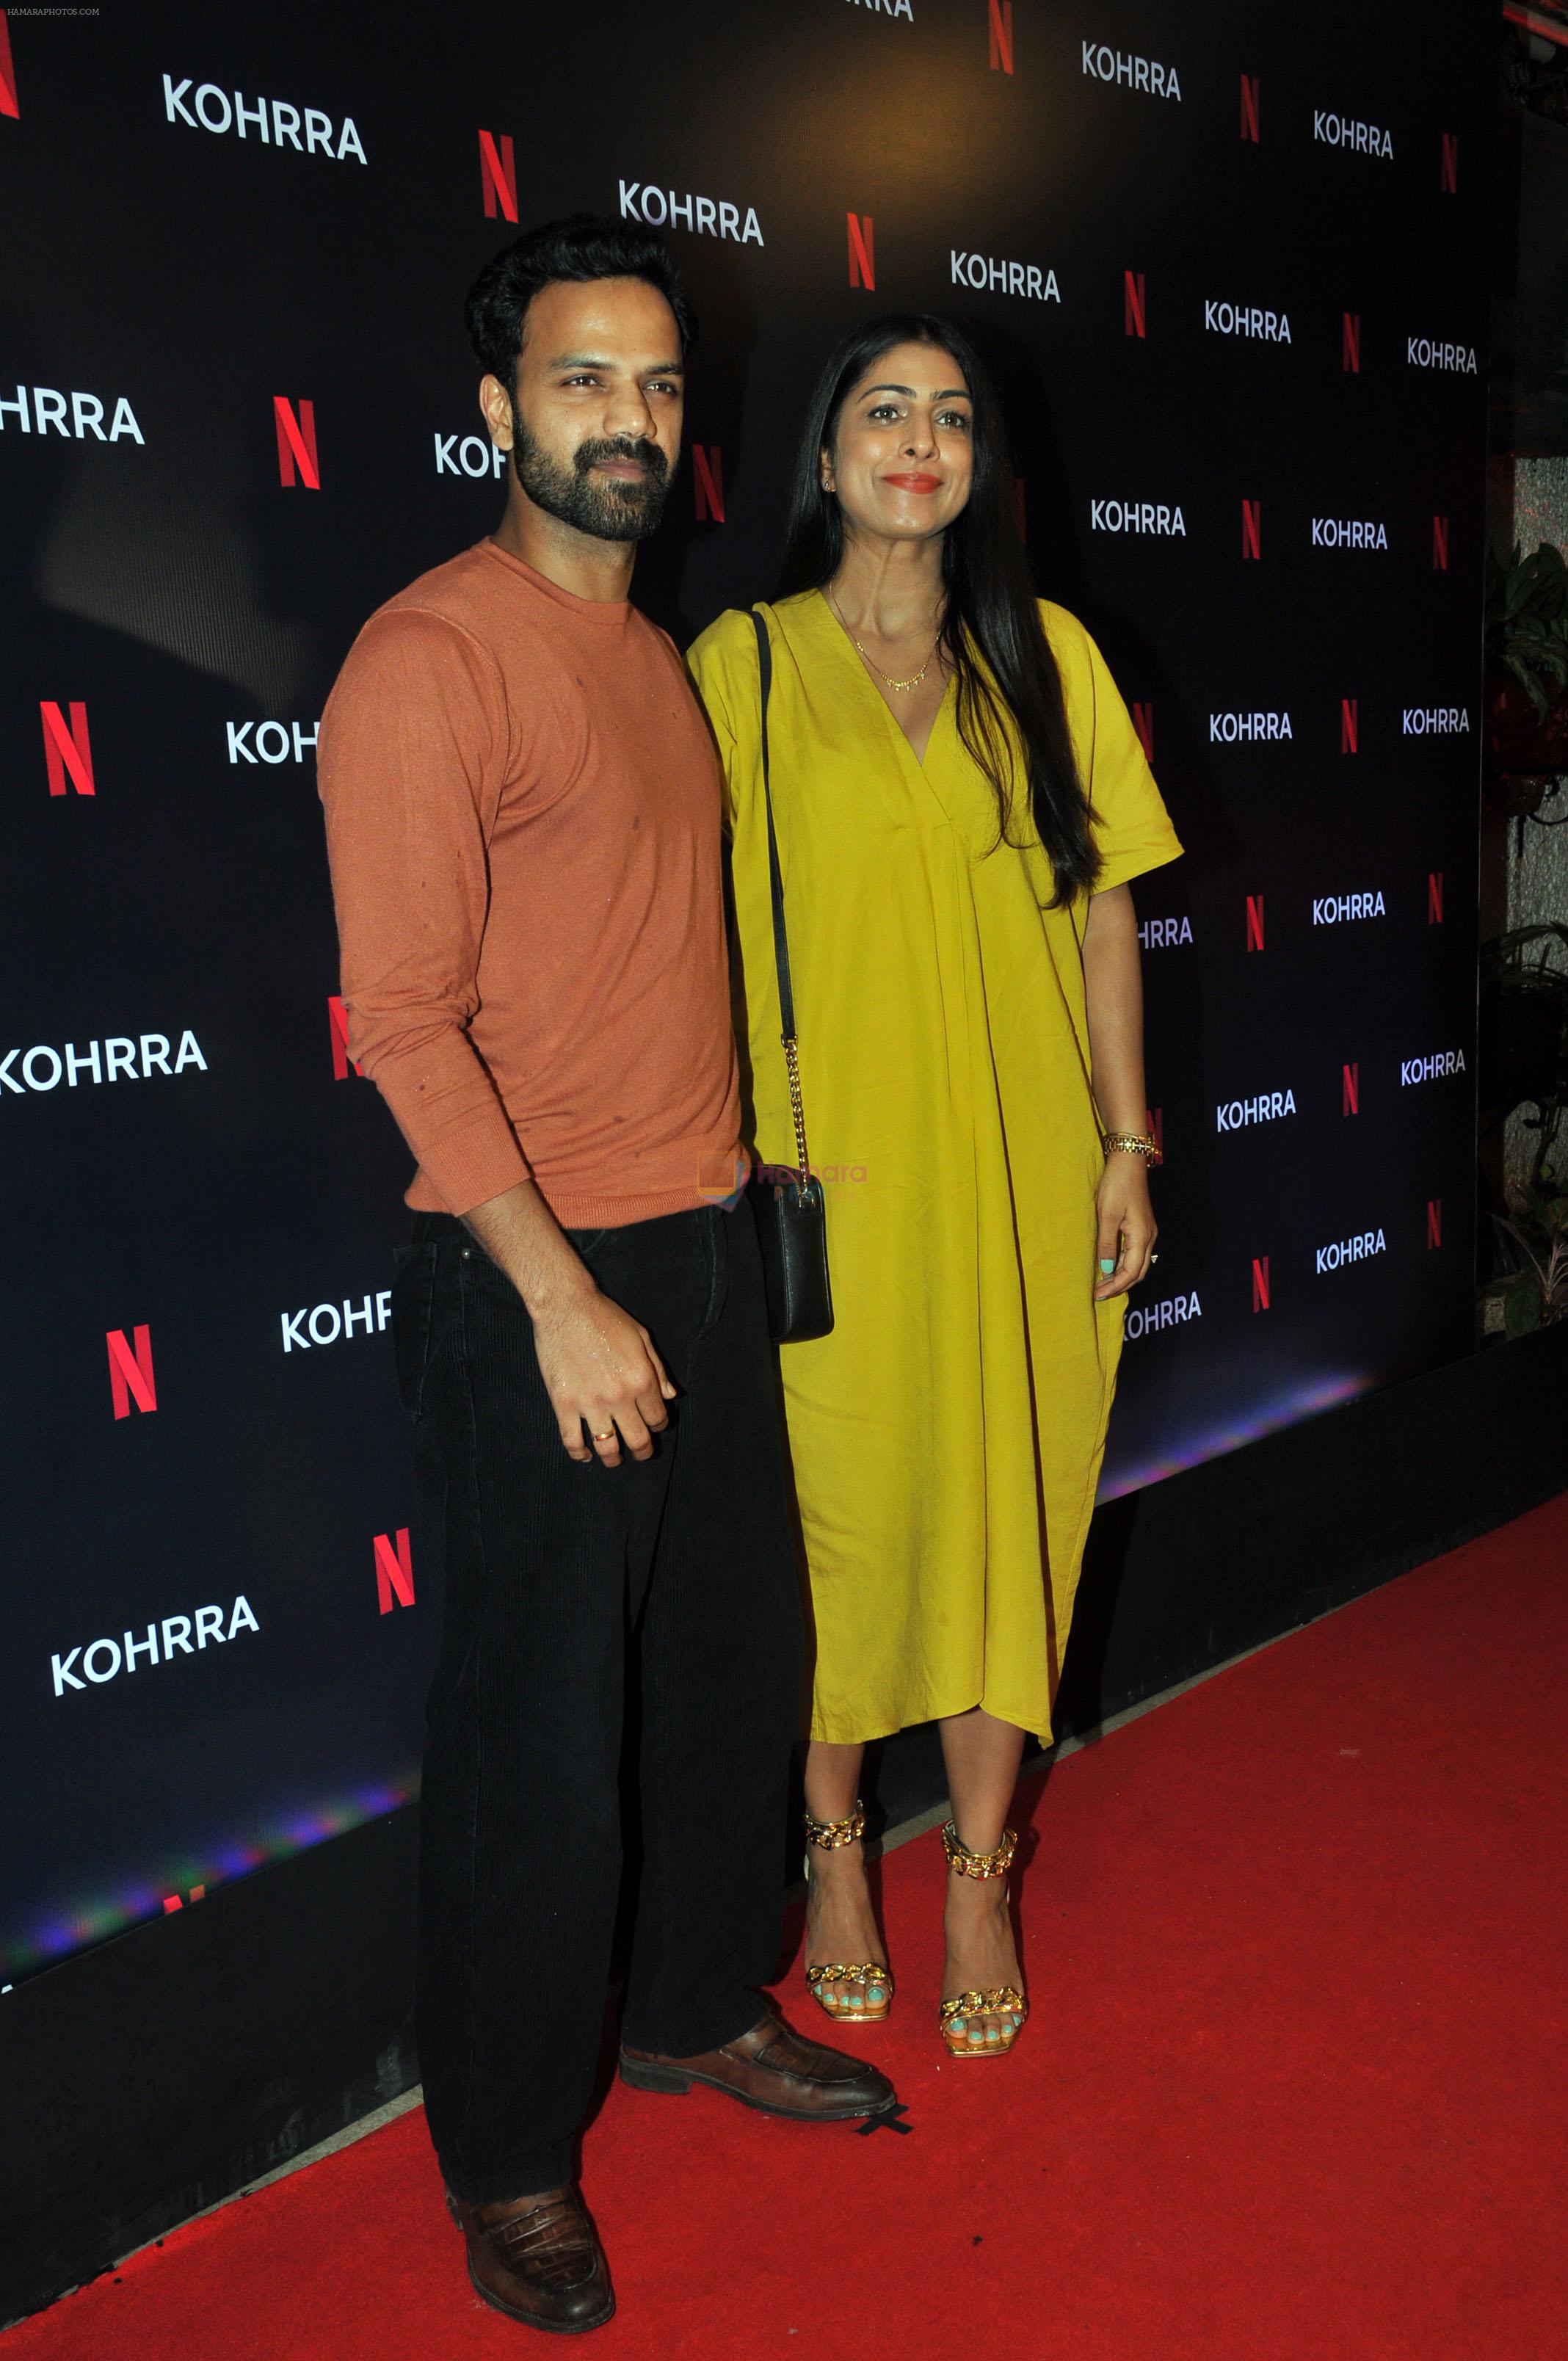 Guests at the premiere of Netflix series Kohrra on 14 July 2023